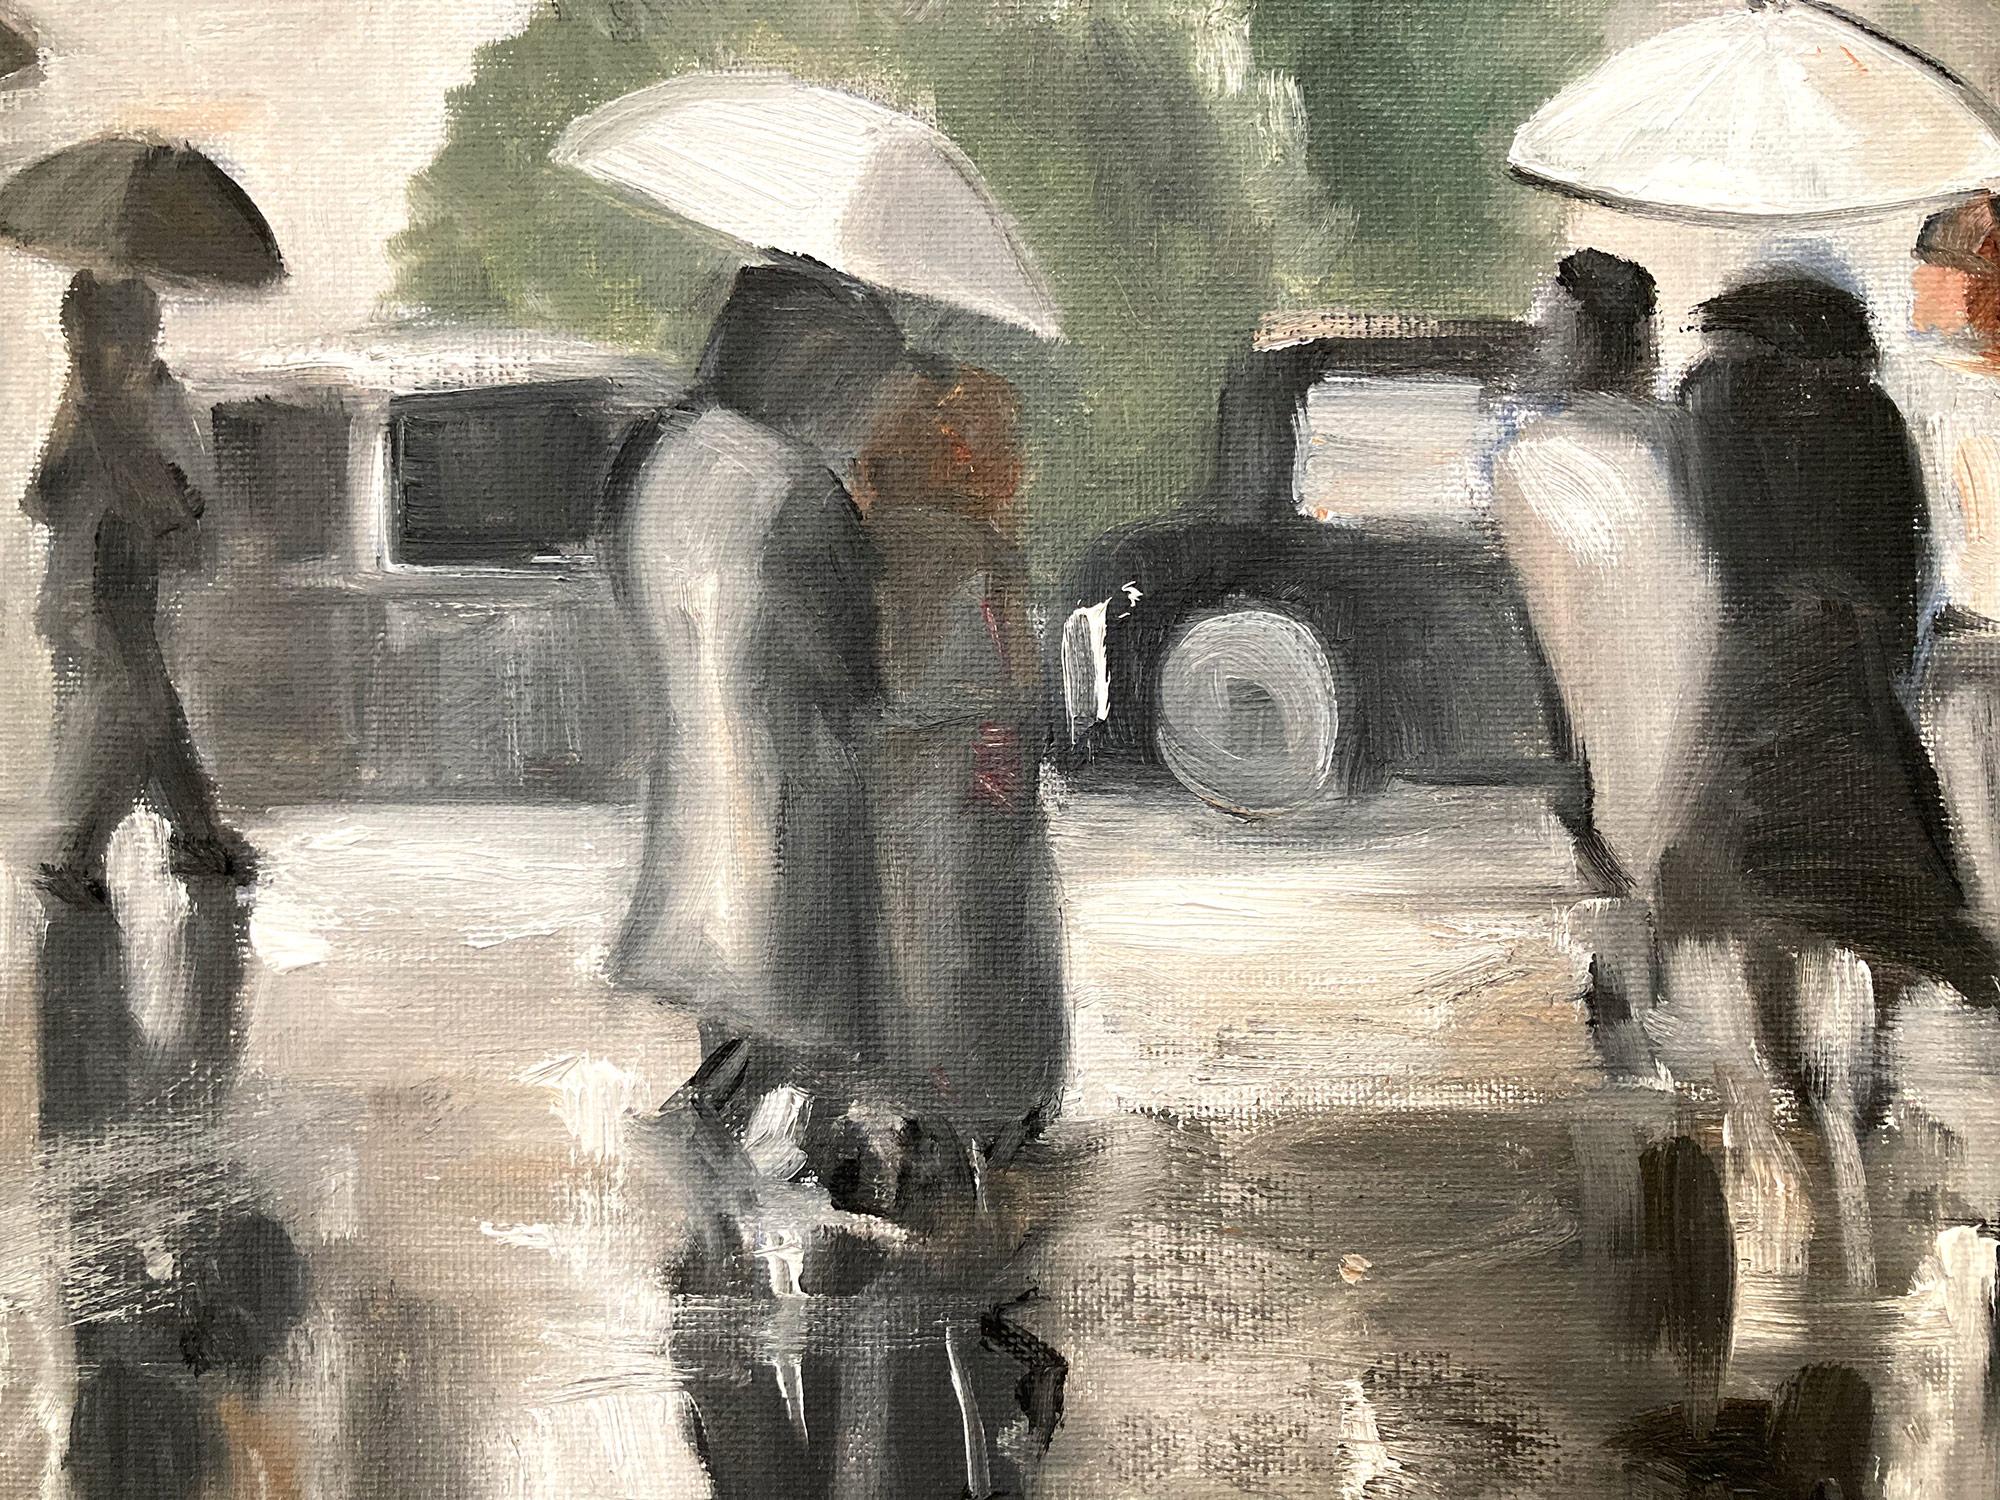 An impressionistic depiction of people walking about near the Metropolitan Museum on a rainy day. A man walks quickly holding a briefcase, a group of woman huddled together under one umbrella; this painting goes back in time as the artist captures